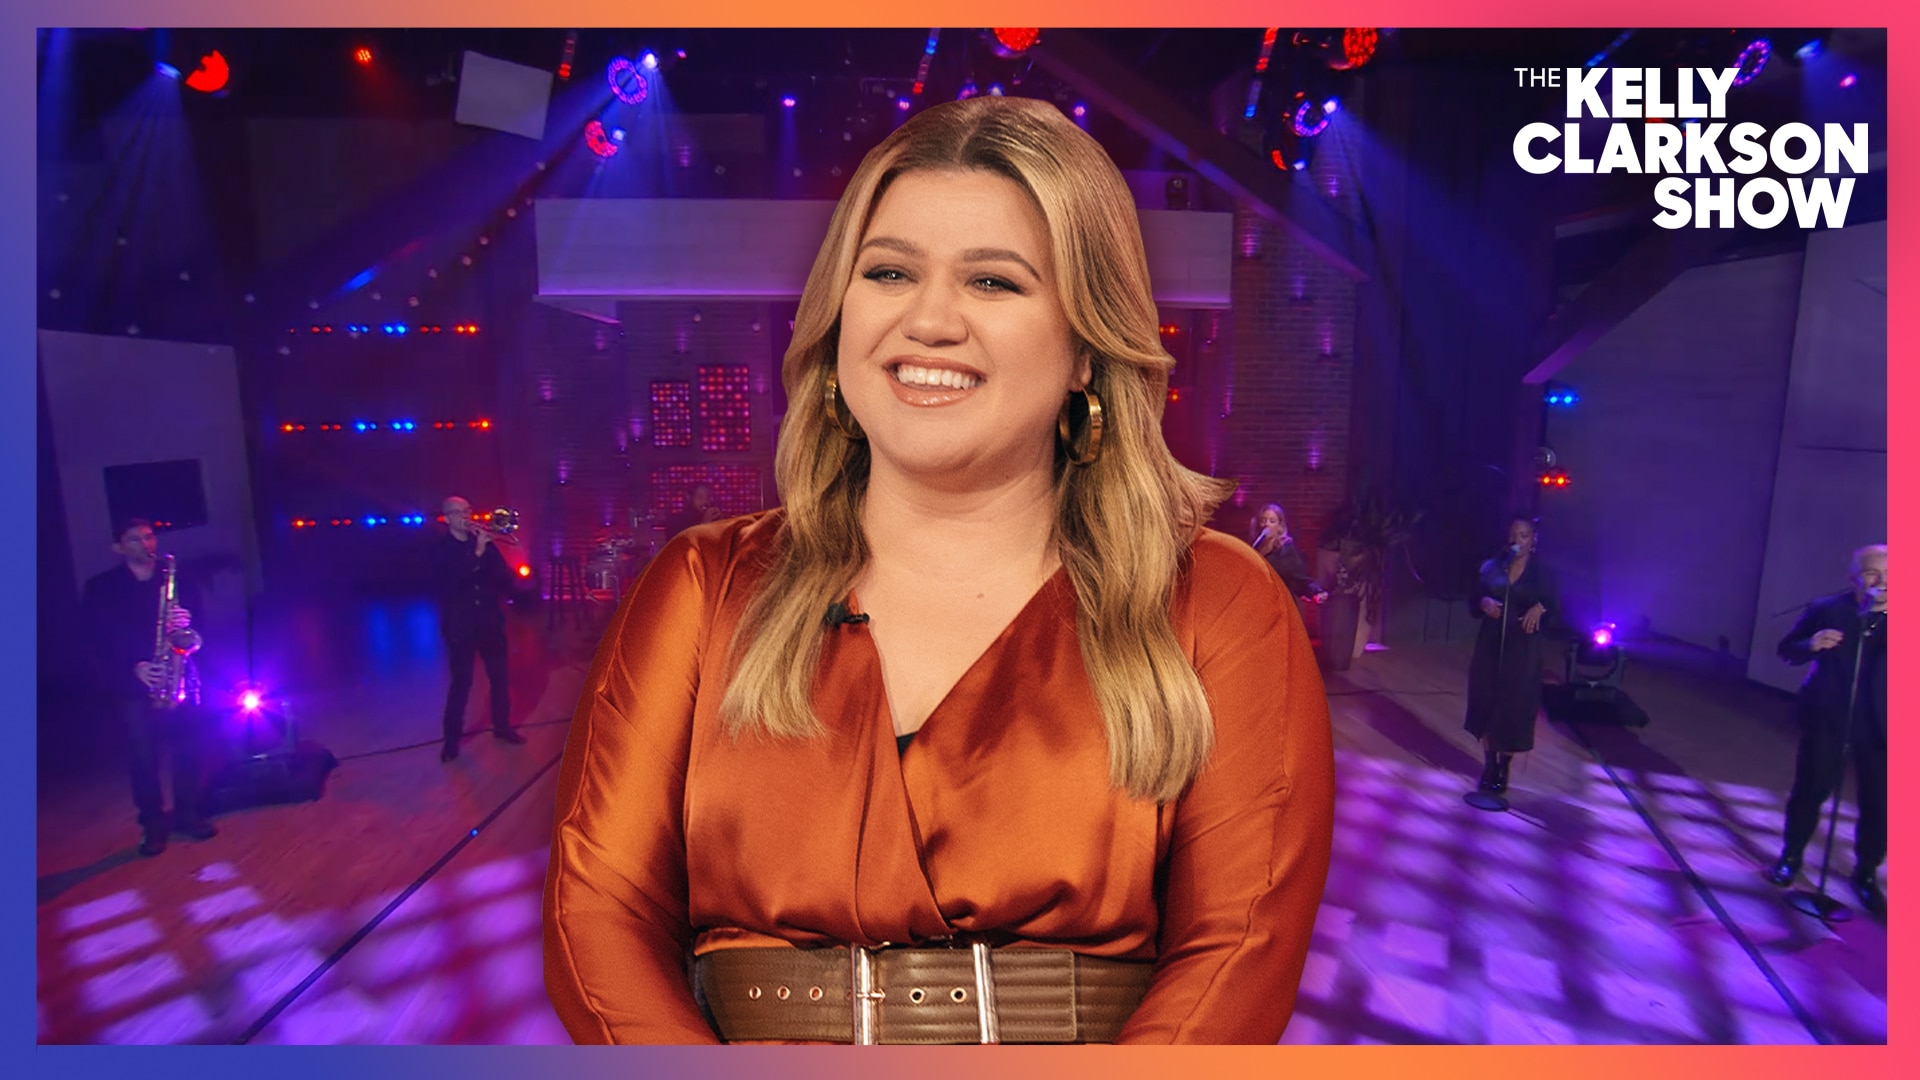 Watch The Kelly Clarkson Show Official Website Highlight Kelly Clarkson Performs Whole Lotta